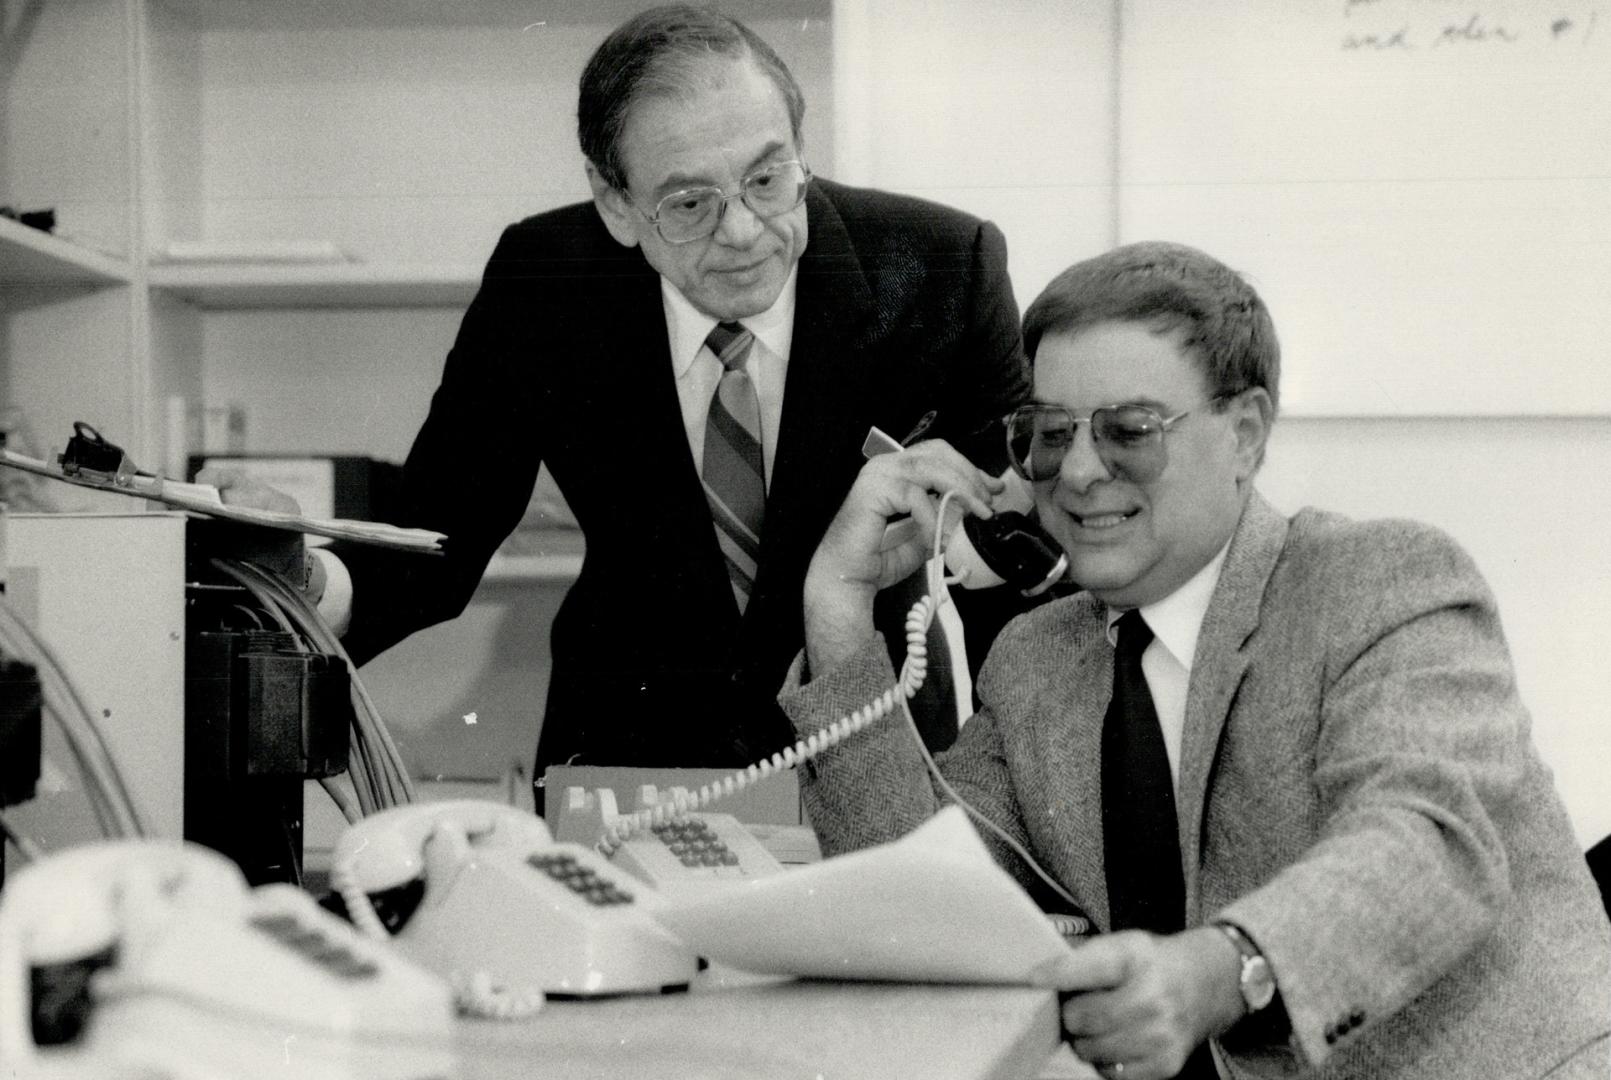 Hot lines: Carl Ellioff (seated) and Oscar Rechtshaffen of Teletalk Ltd. check the automated electronic equipment that handles an average 100,000 paid calls a month made to the firm.